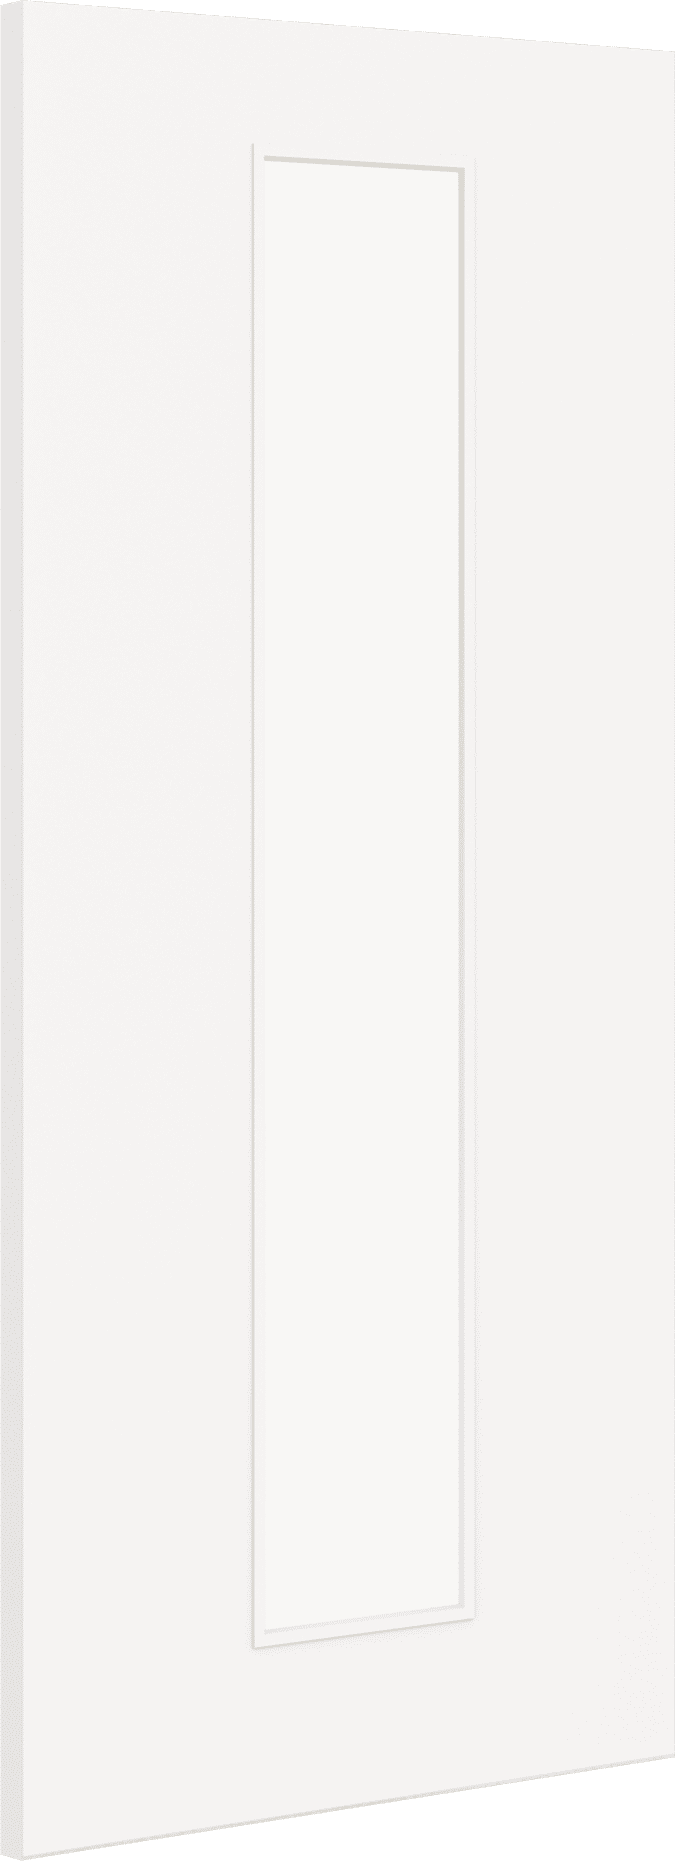 1981mm x 610mm x 44mm (24") Architectural Paint Grade White 10 Clear Glazed Fire Door Blank